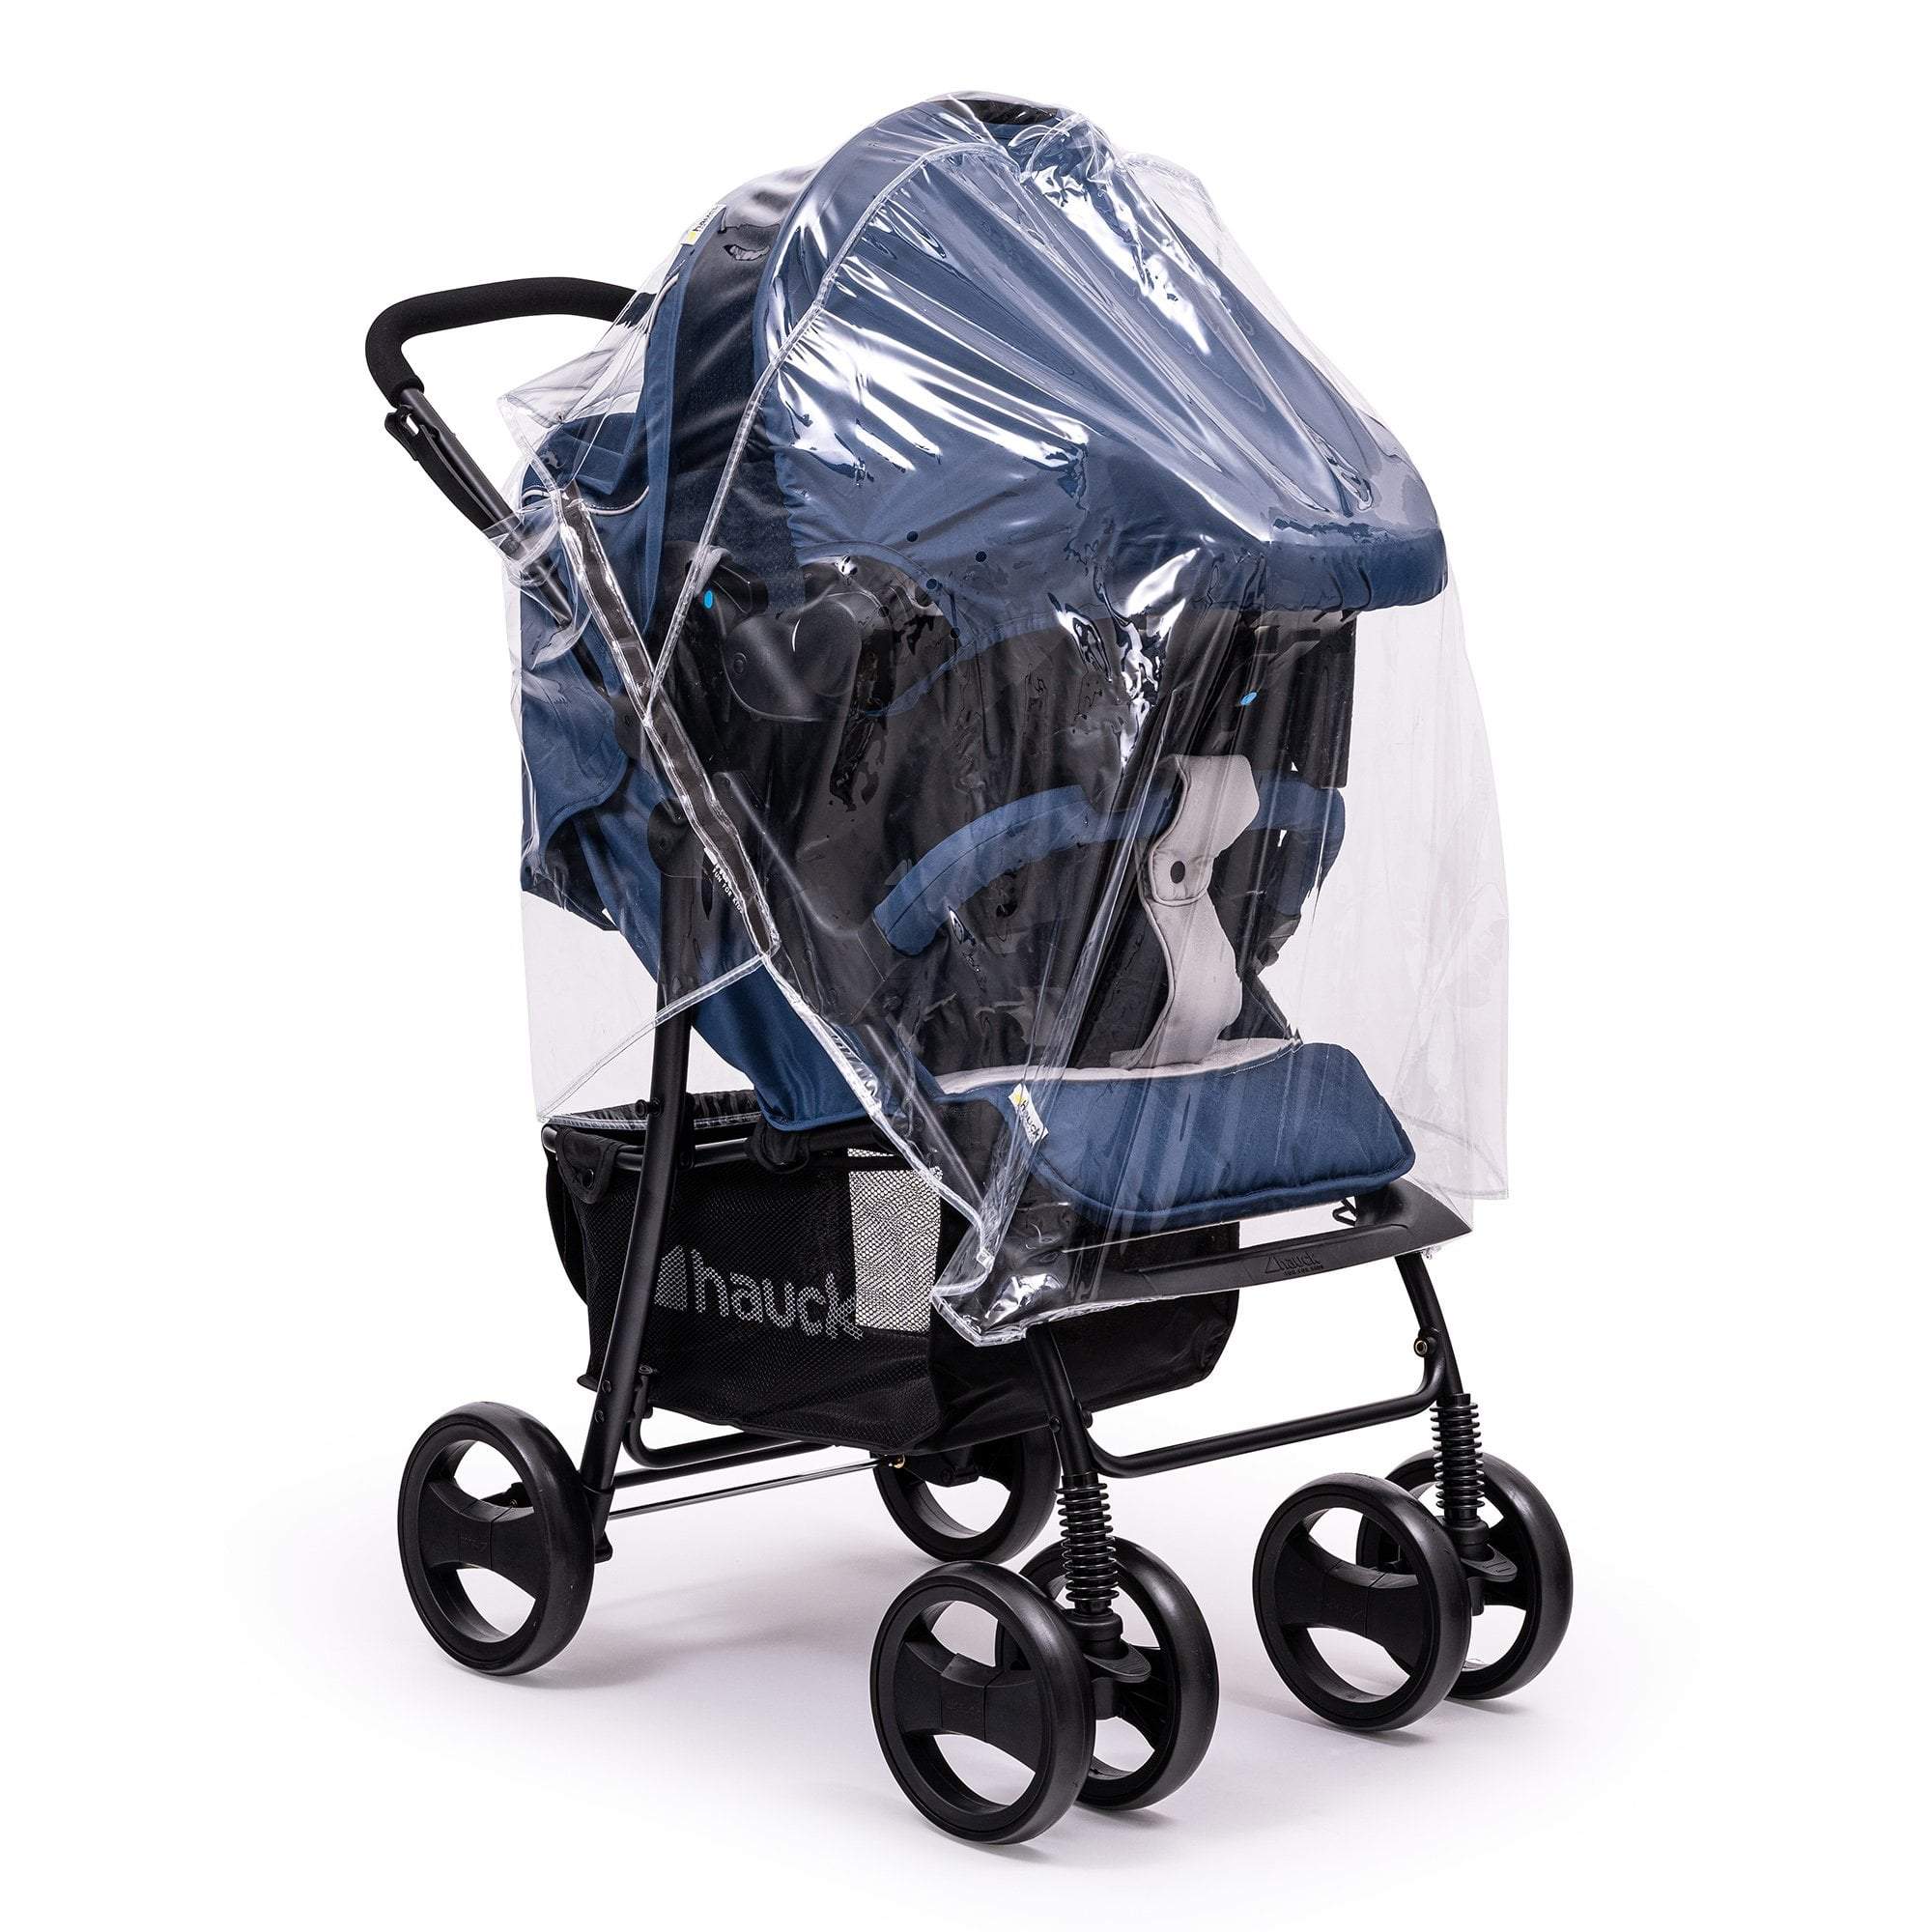 Travel System Raincover Compatible with Orbit - Fits All Models - For Your Little One